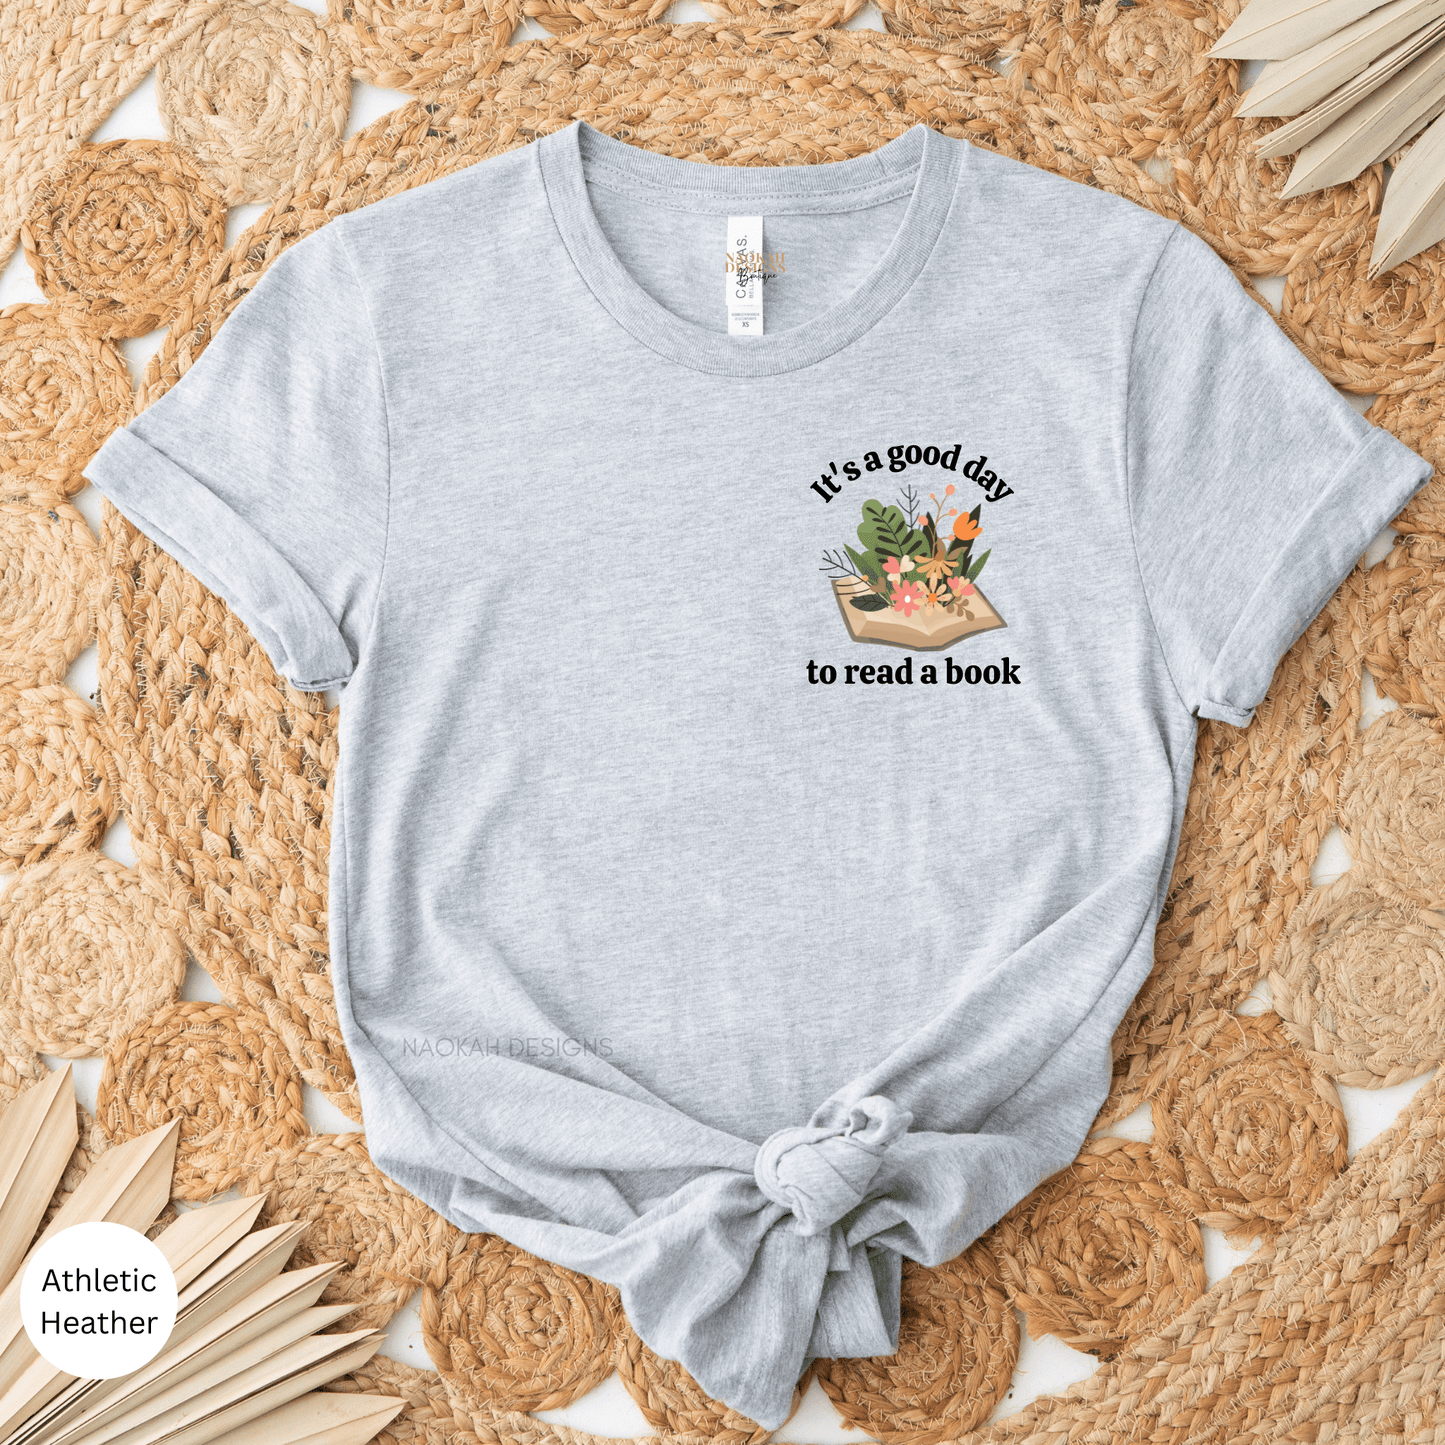 It's A Good Day To Read A Book Shirt, Reading Shirt, Gift for Teacher, Book Lover Gift For Women, Flower Book Lover, English Teacher, Literary Shirt, Bookish Shirt, Reading Shirt, Read Banned Books Shirt